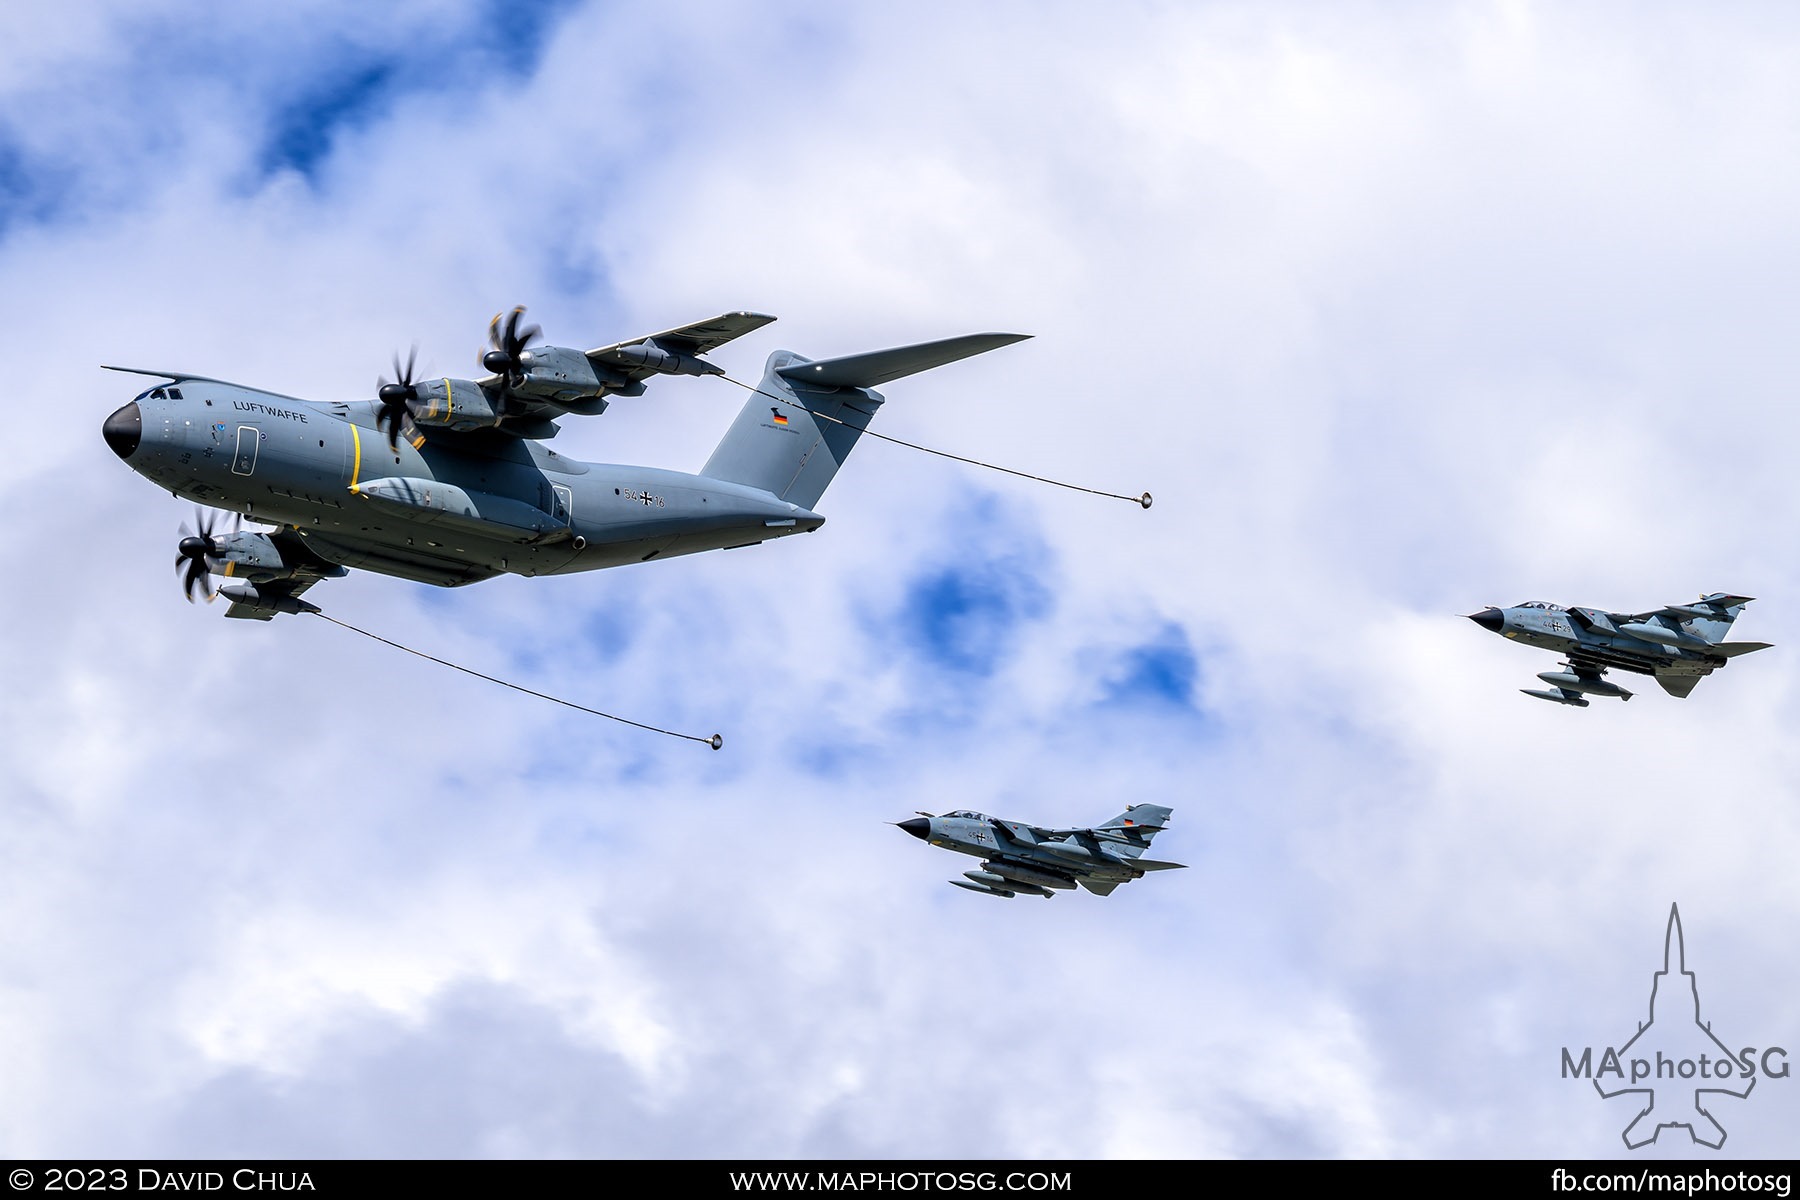 German Air Force Refuelling Display with a A400M and 2 Tornadoes